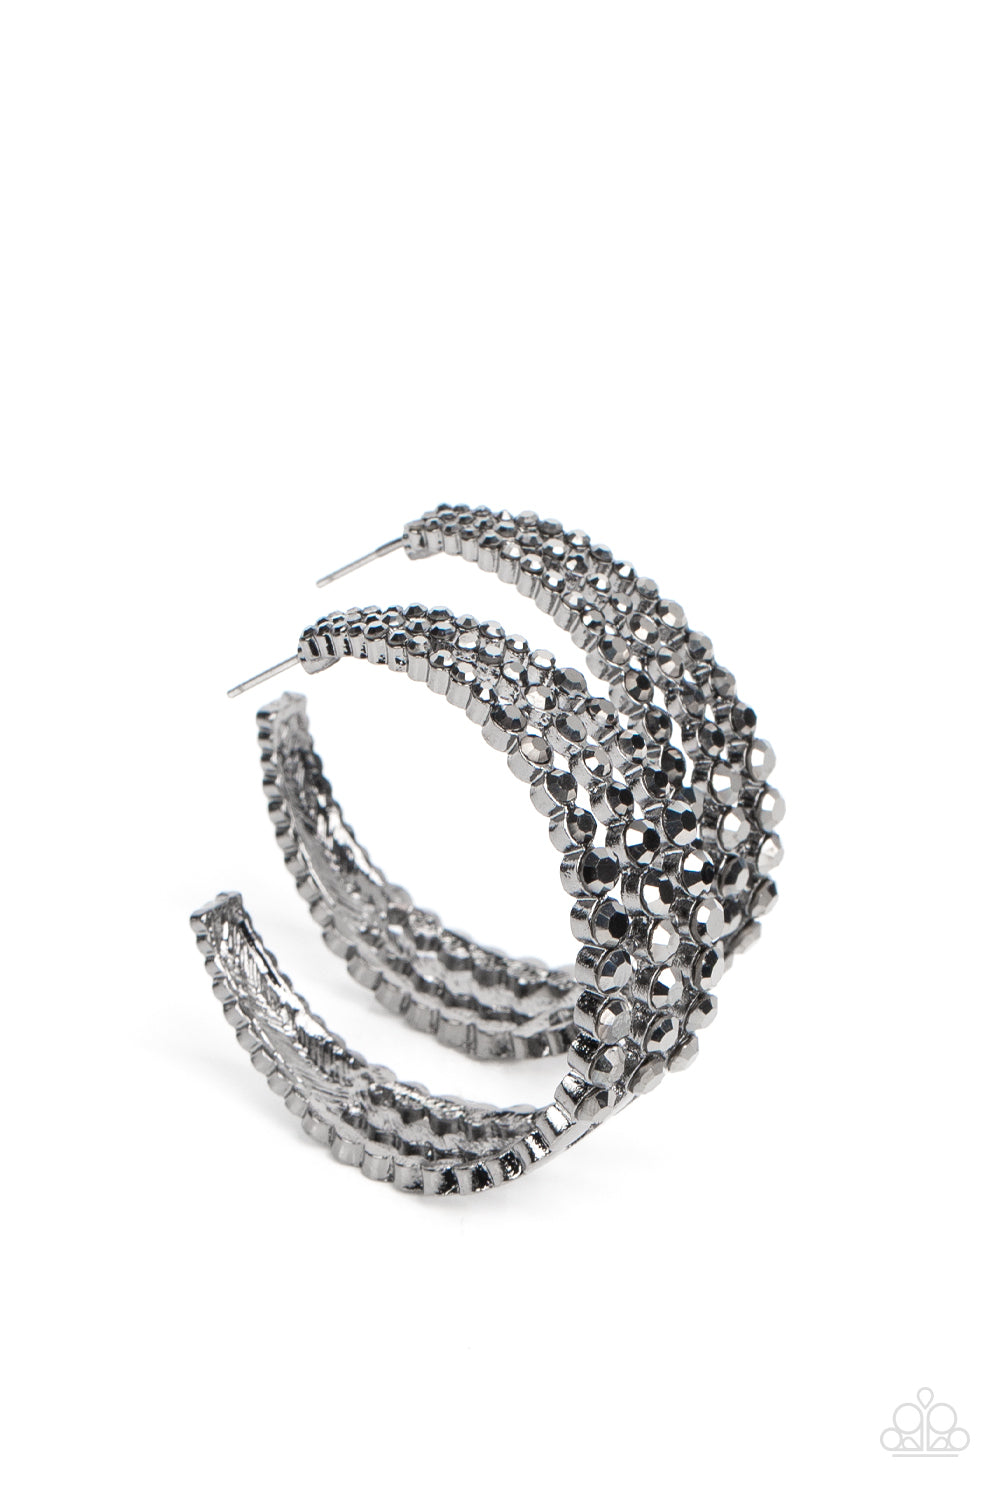 Cosmopolitan Cool Black Hoop Earring - Paparazzi Accessories  Cascading layers of smoldering hematite rhinestones plunge into flattened gunmetal plates creating a stunning eye-catching hoop earring. Earring attaches to a standard post fitting. Hoop measures approximately 2" in diameter.  Sold as one pair of hoop earrings.